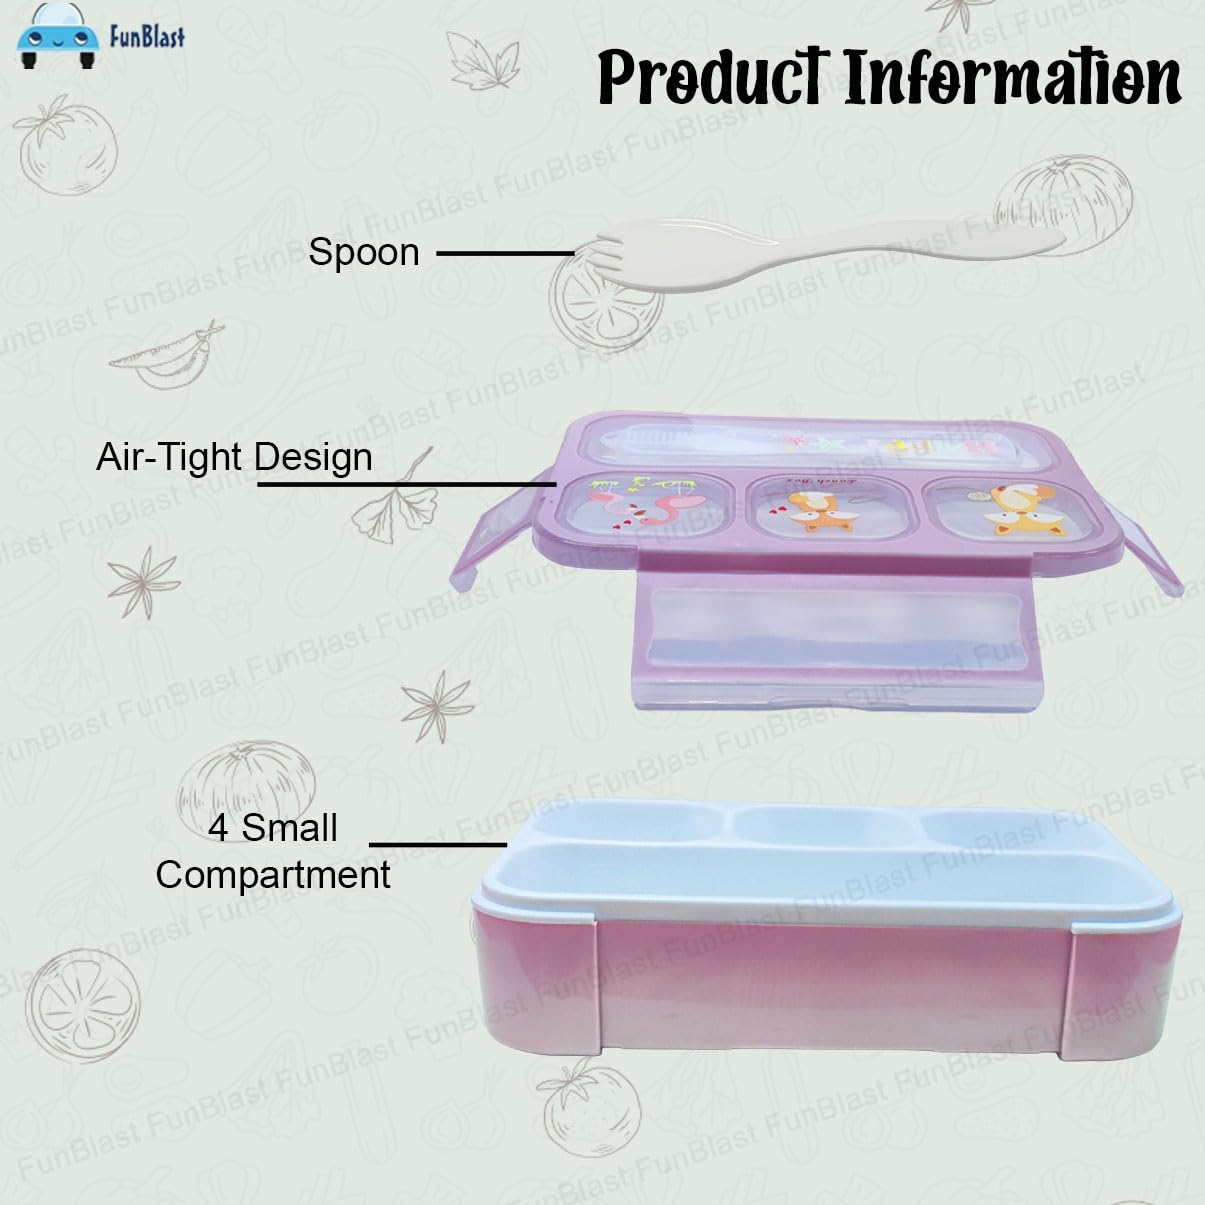 Lunch Box for Kids – Lunch Box for School Kids, Airtight Leak-Proof Tiffin Box, Plastic Microwave Safe Tiffin Box with 4 Small Compartment (Pink)